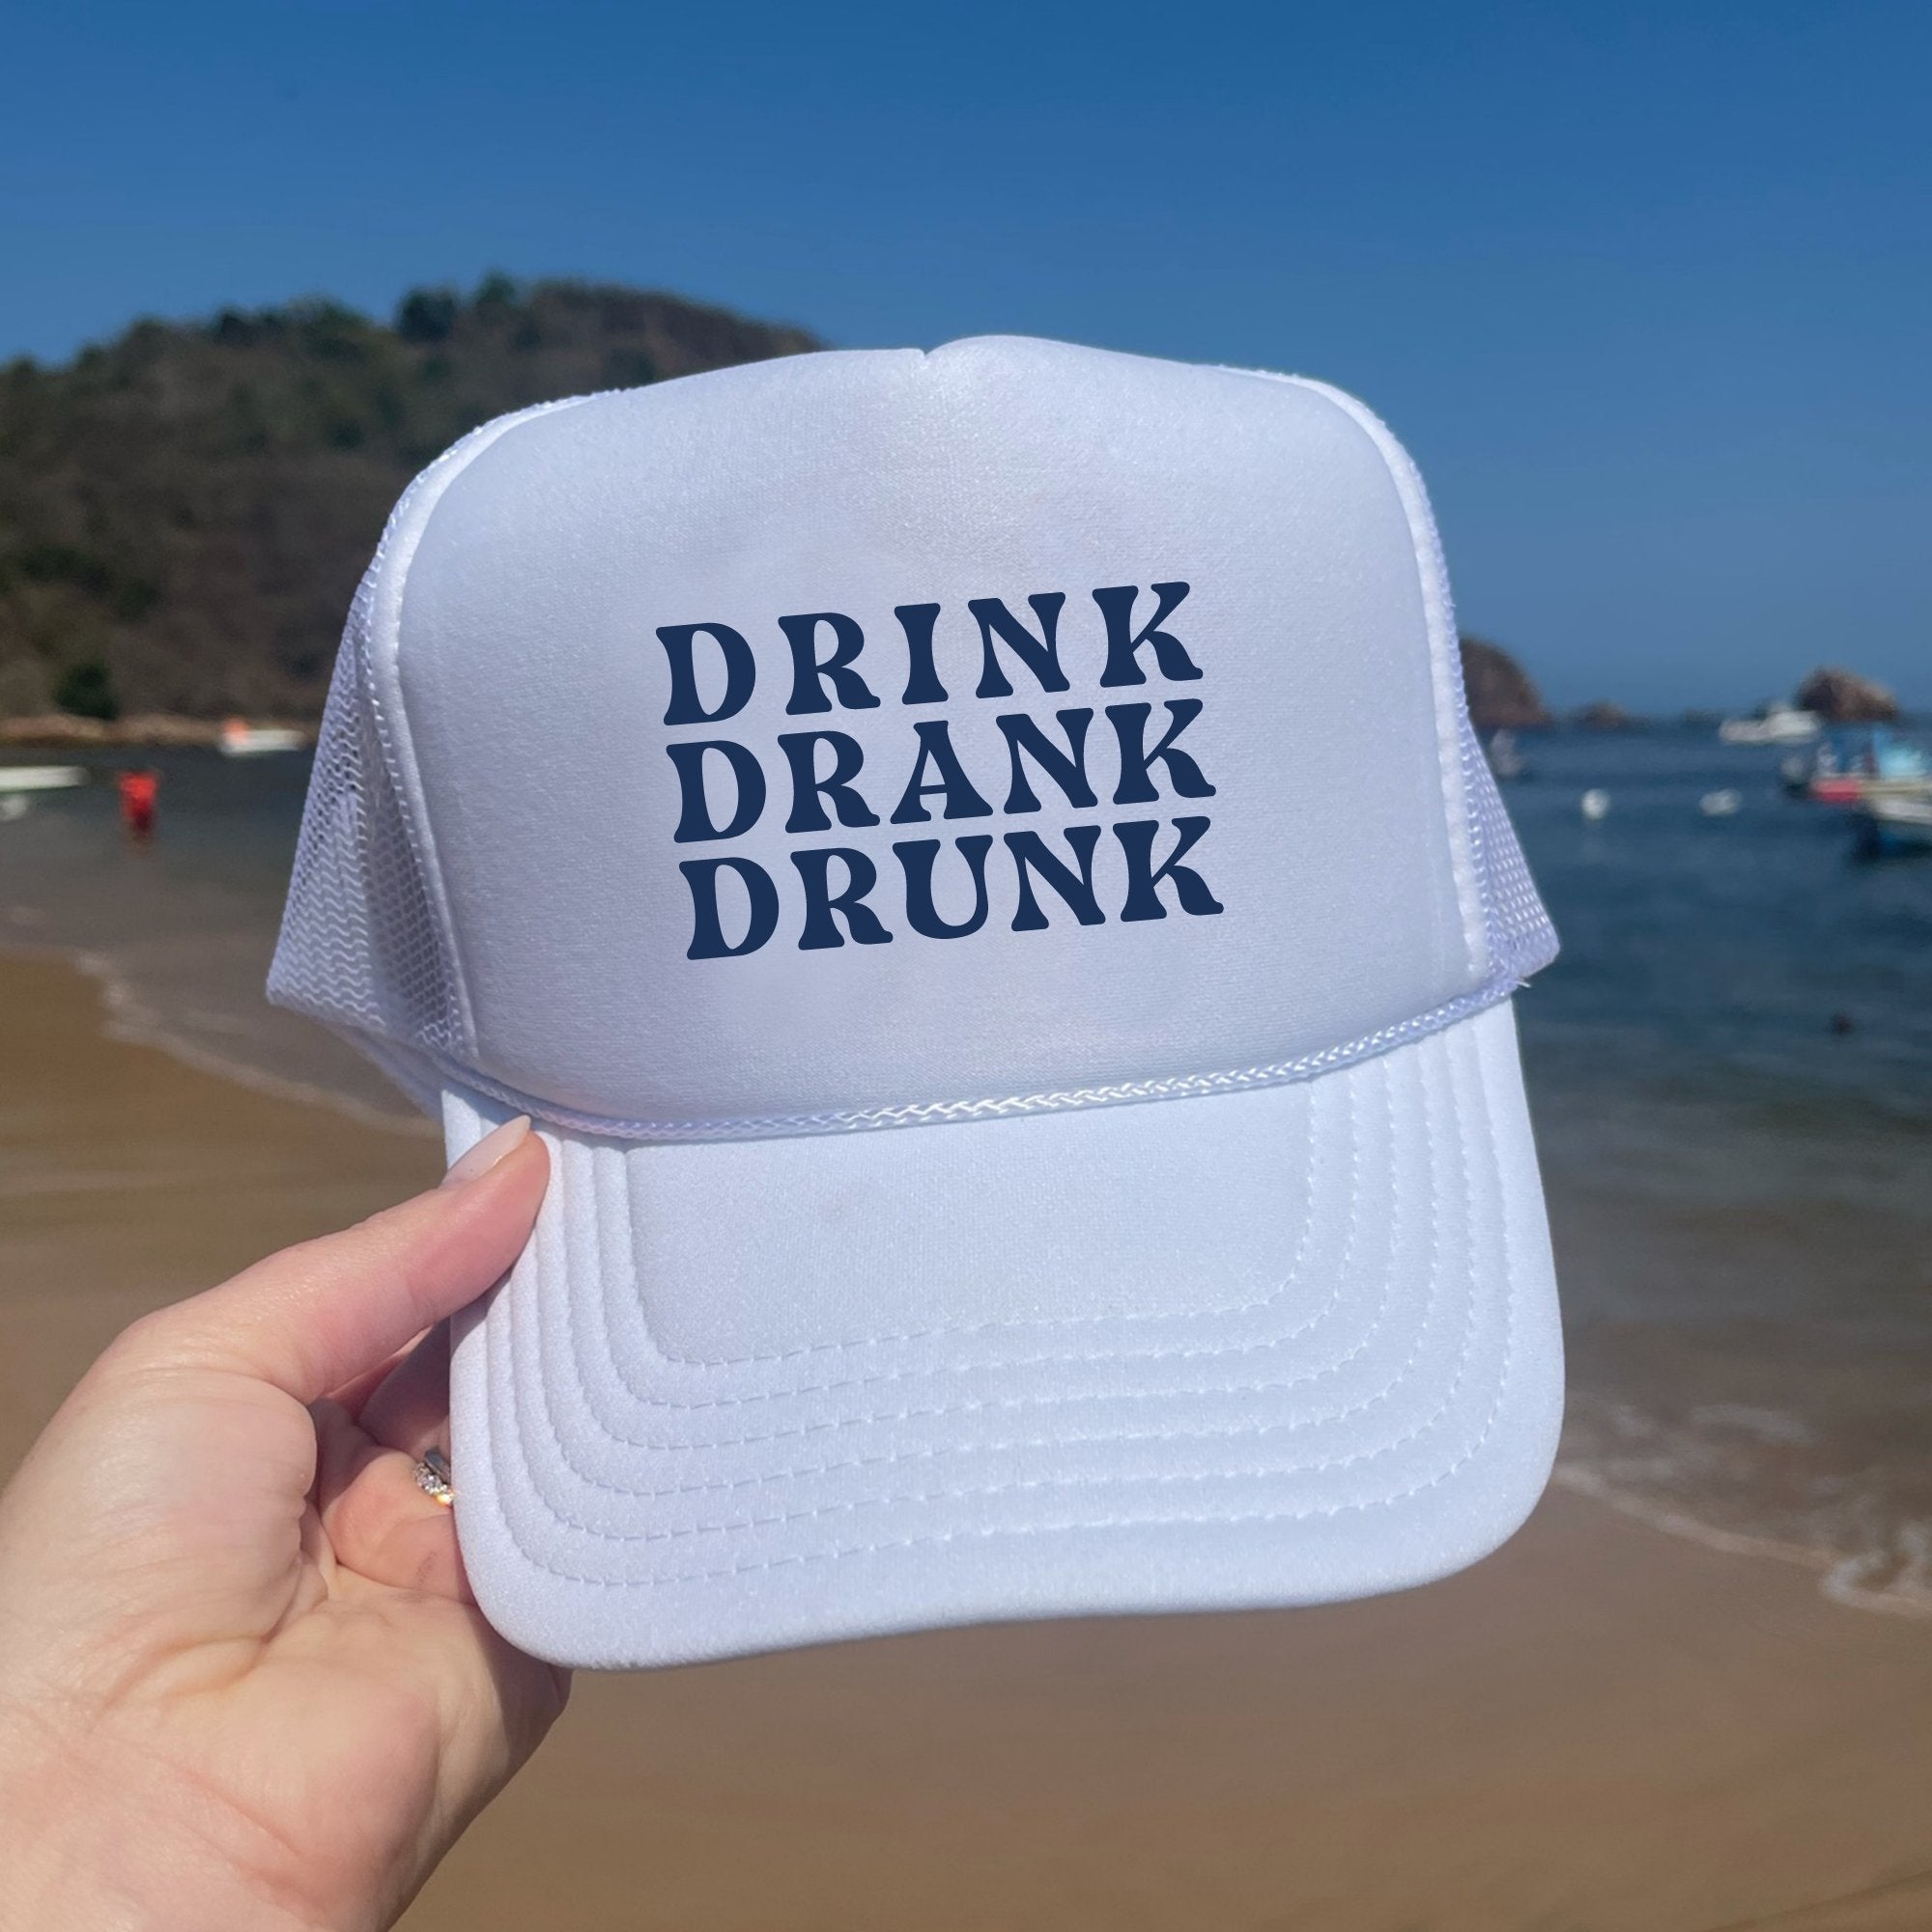 Drink Drank Drunk White Trucker Hat (White) - Sprinkled With Pink #bachelorette #custom #gifts